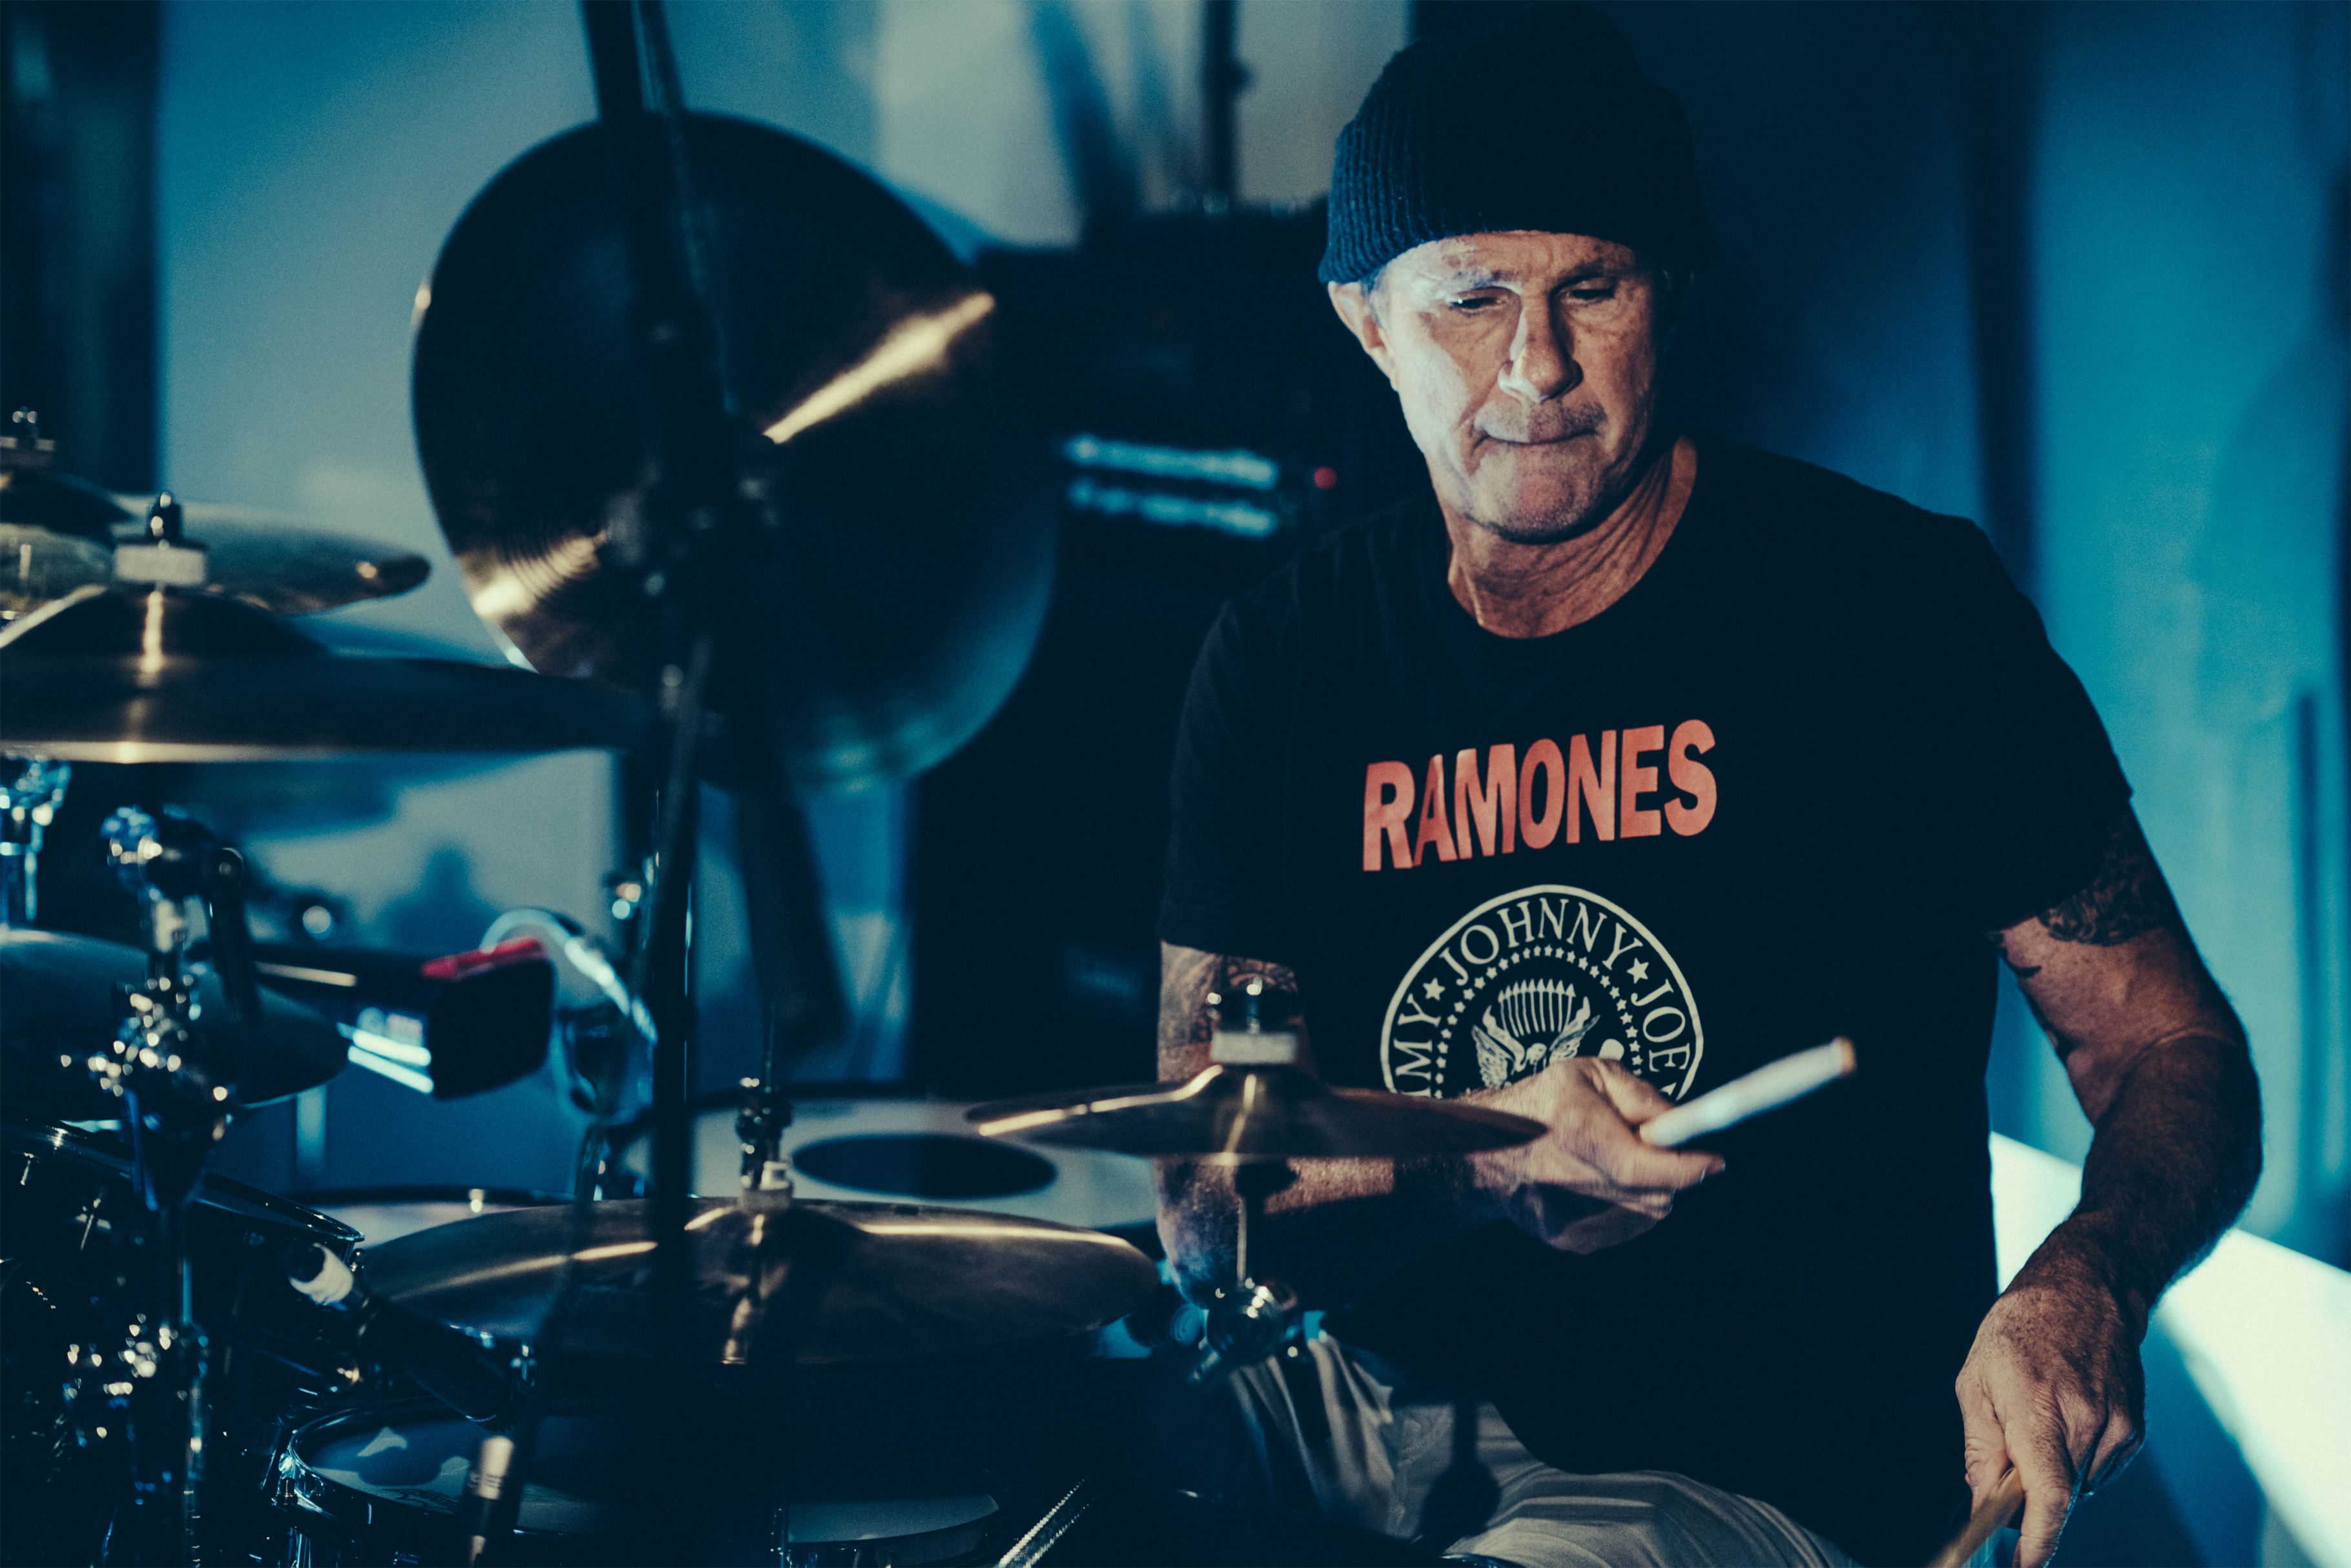 ACM welcome Red Hot Chilli Peppers drummer, Chad Smith